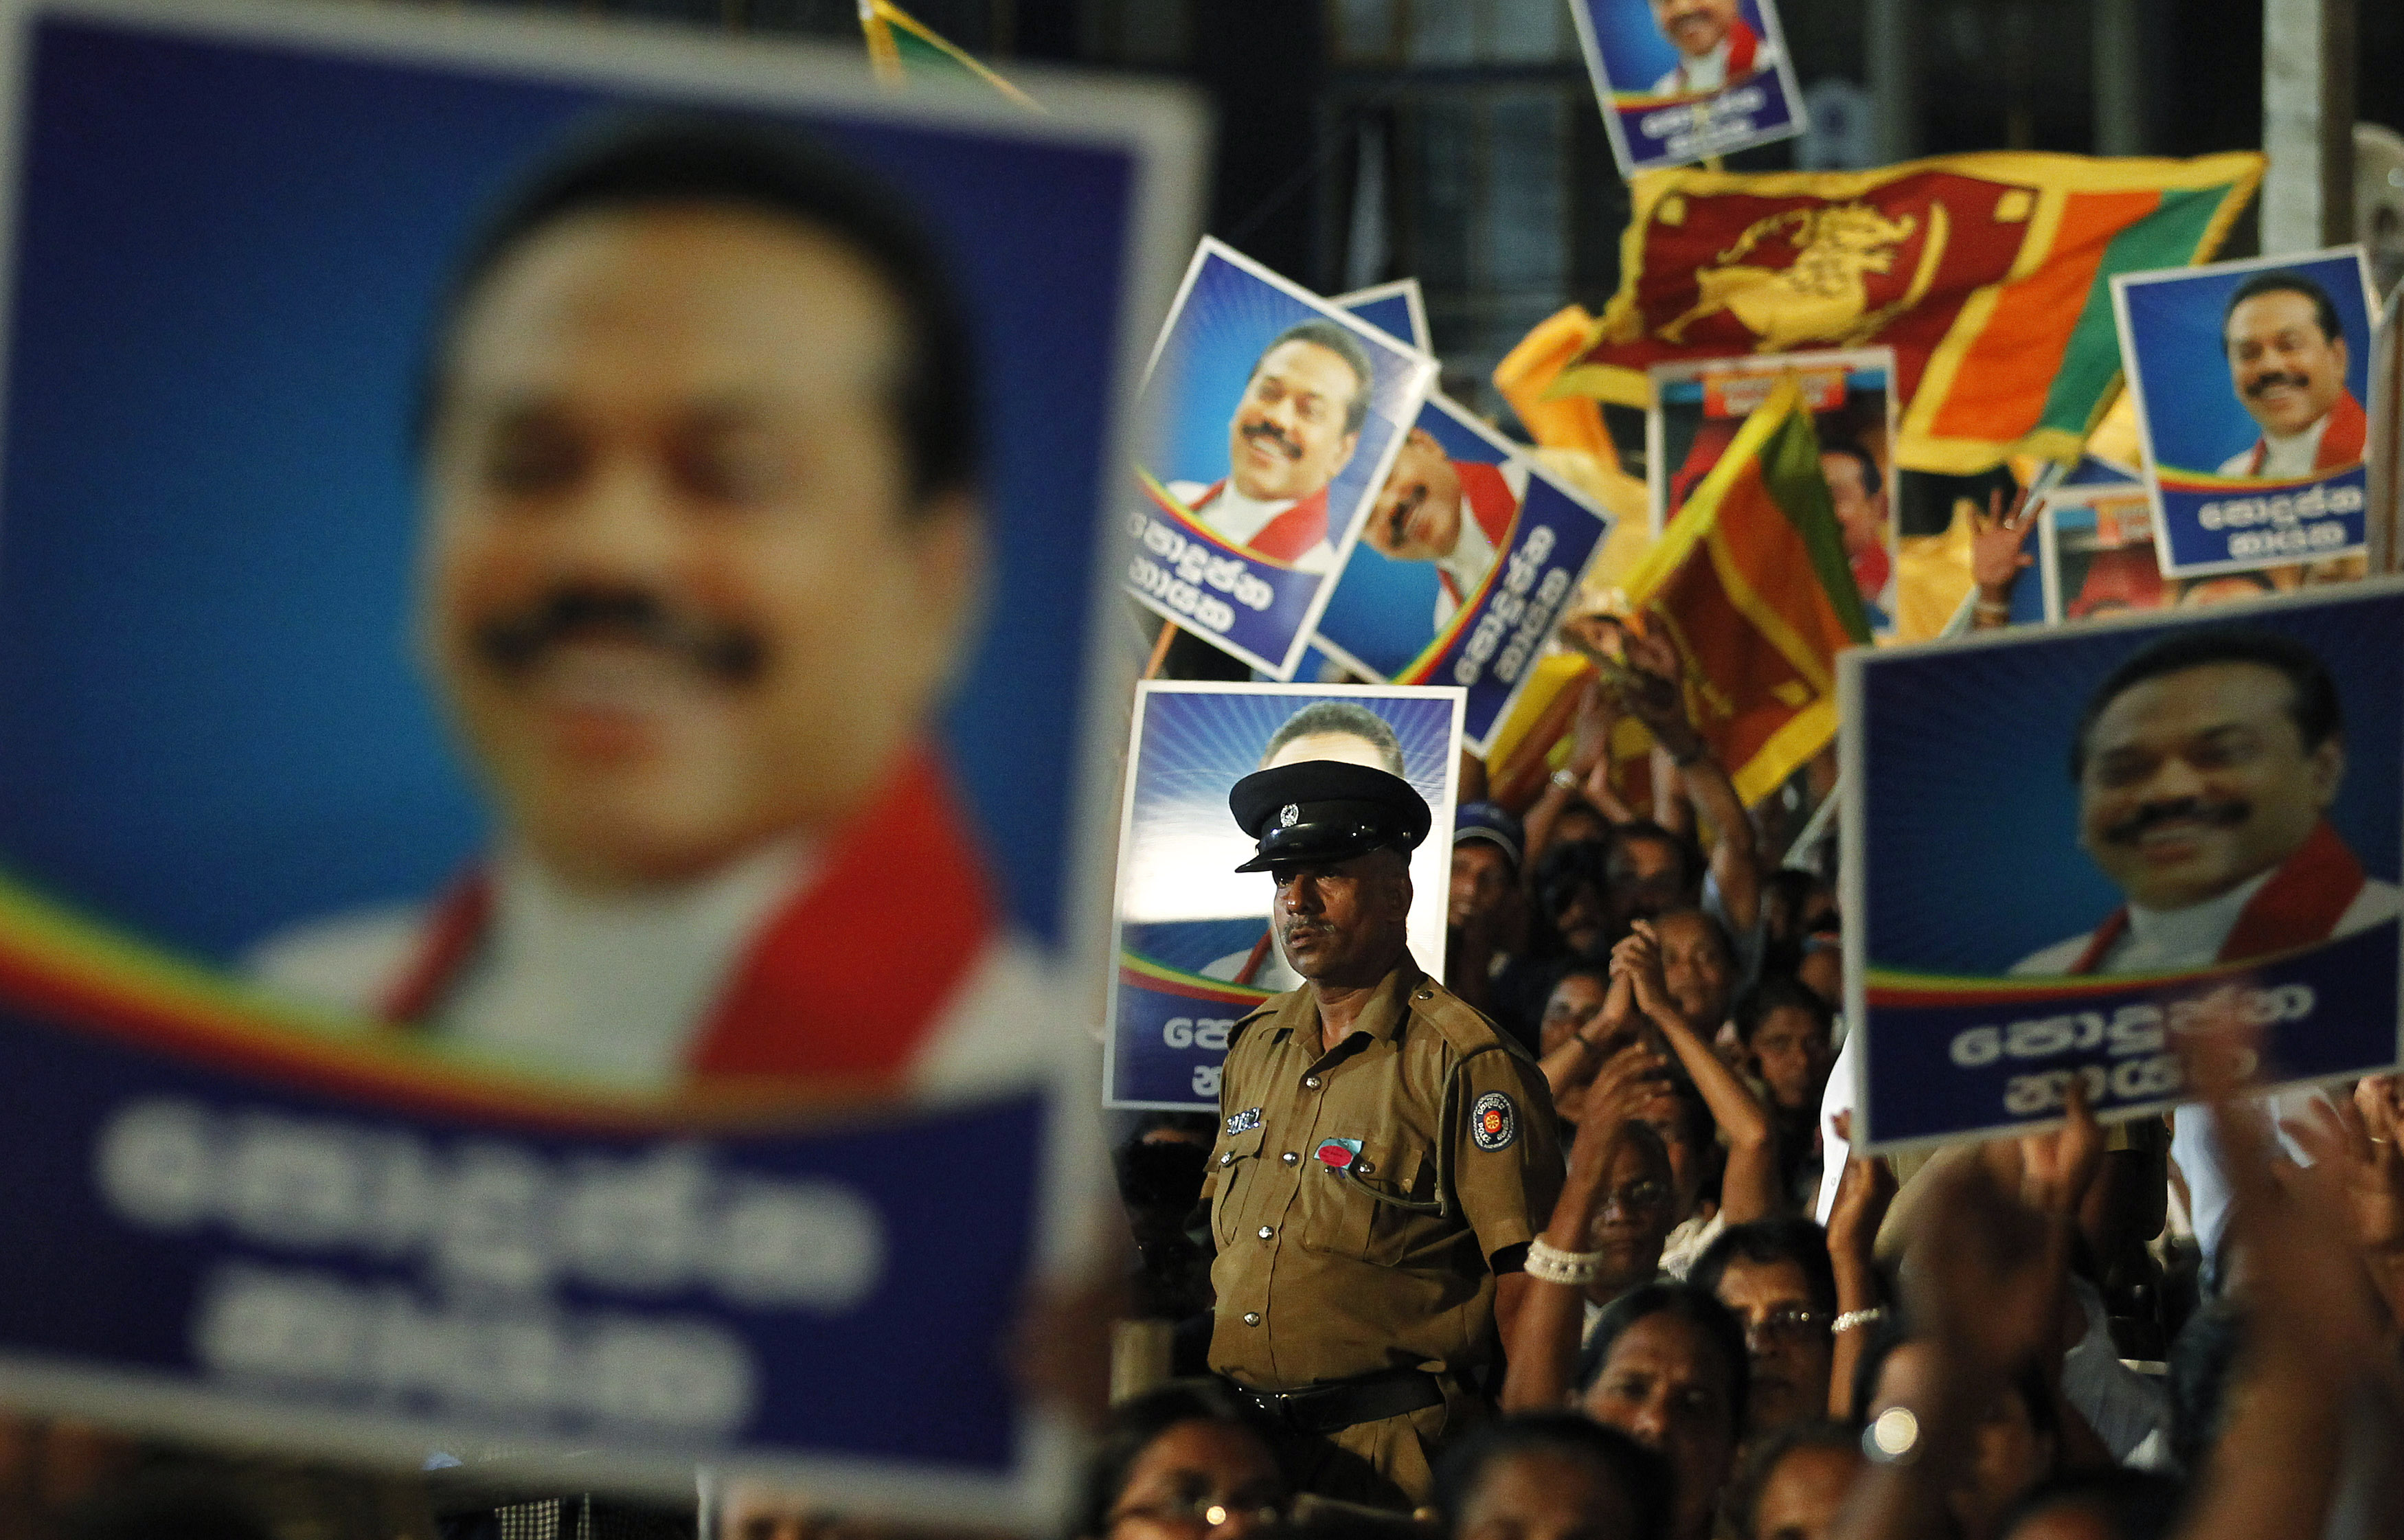 A police officer stands guard among images of then president Mahinda Rajapaksa during his final rally ahead of the presidential election in Piliyandala 5 January 2015